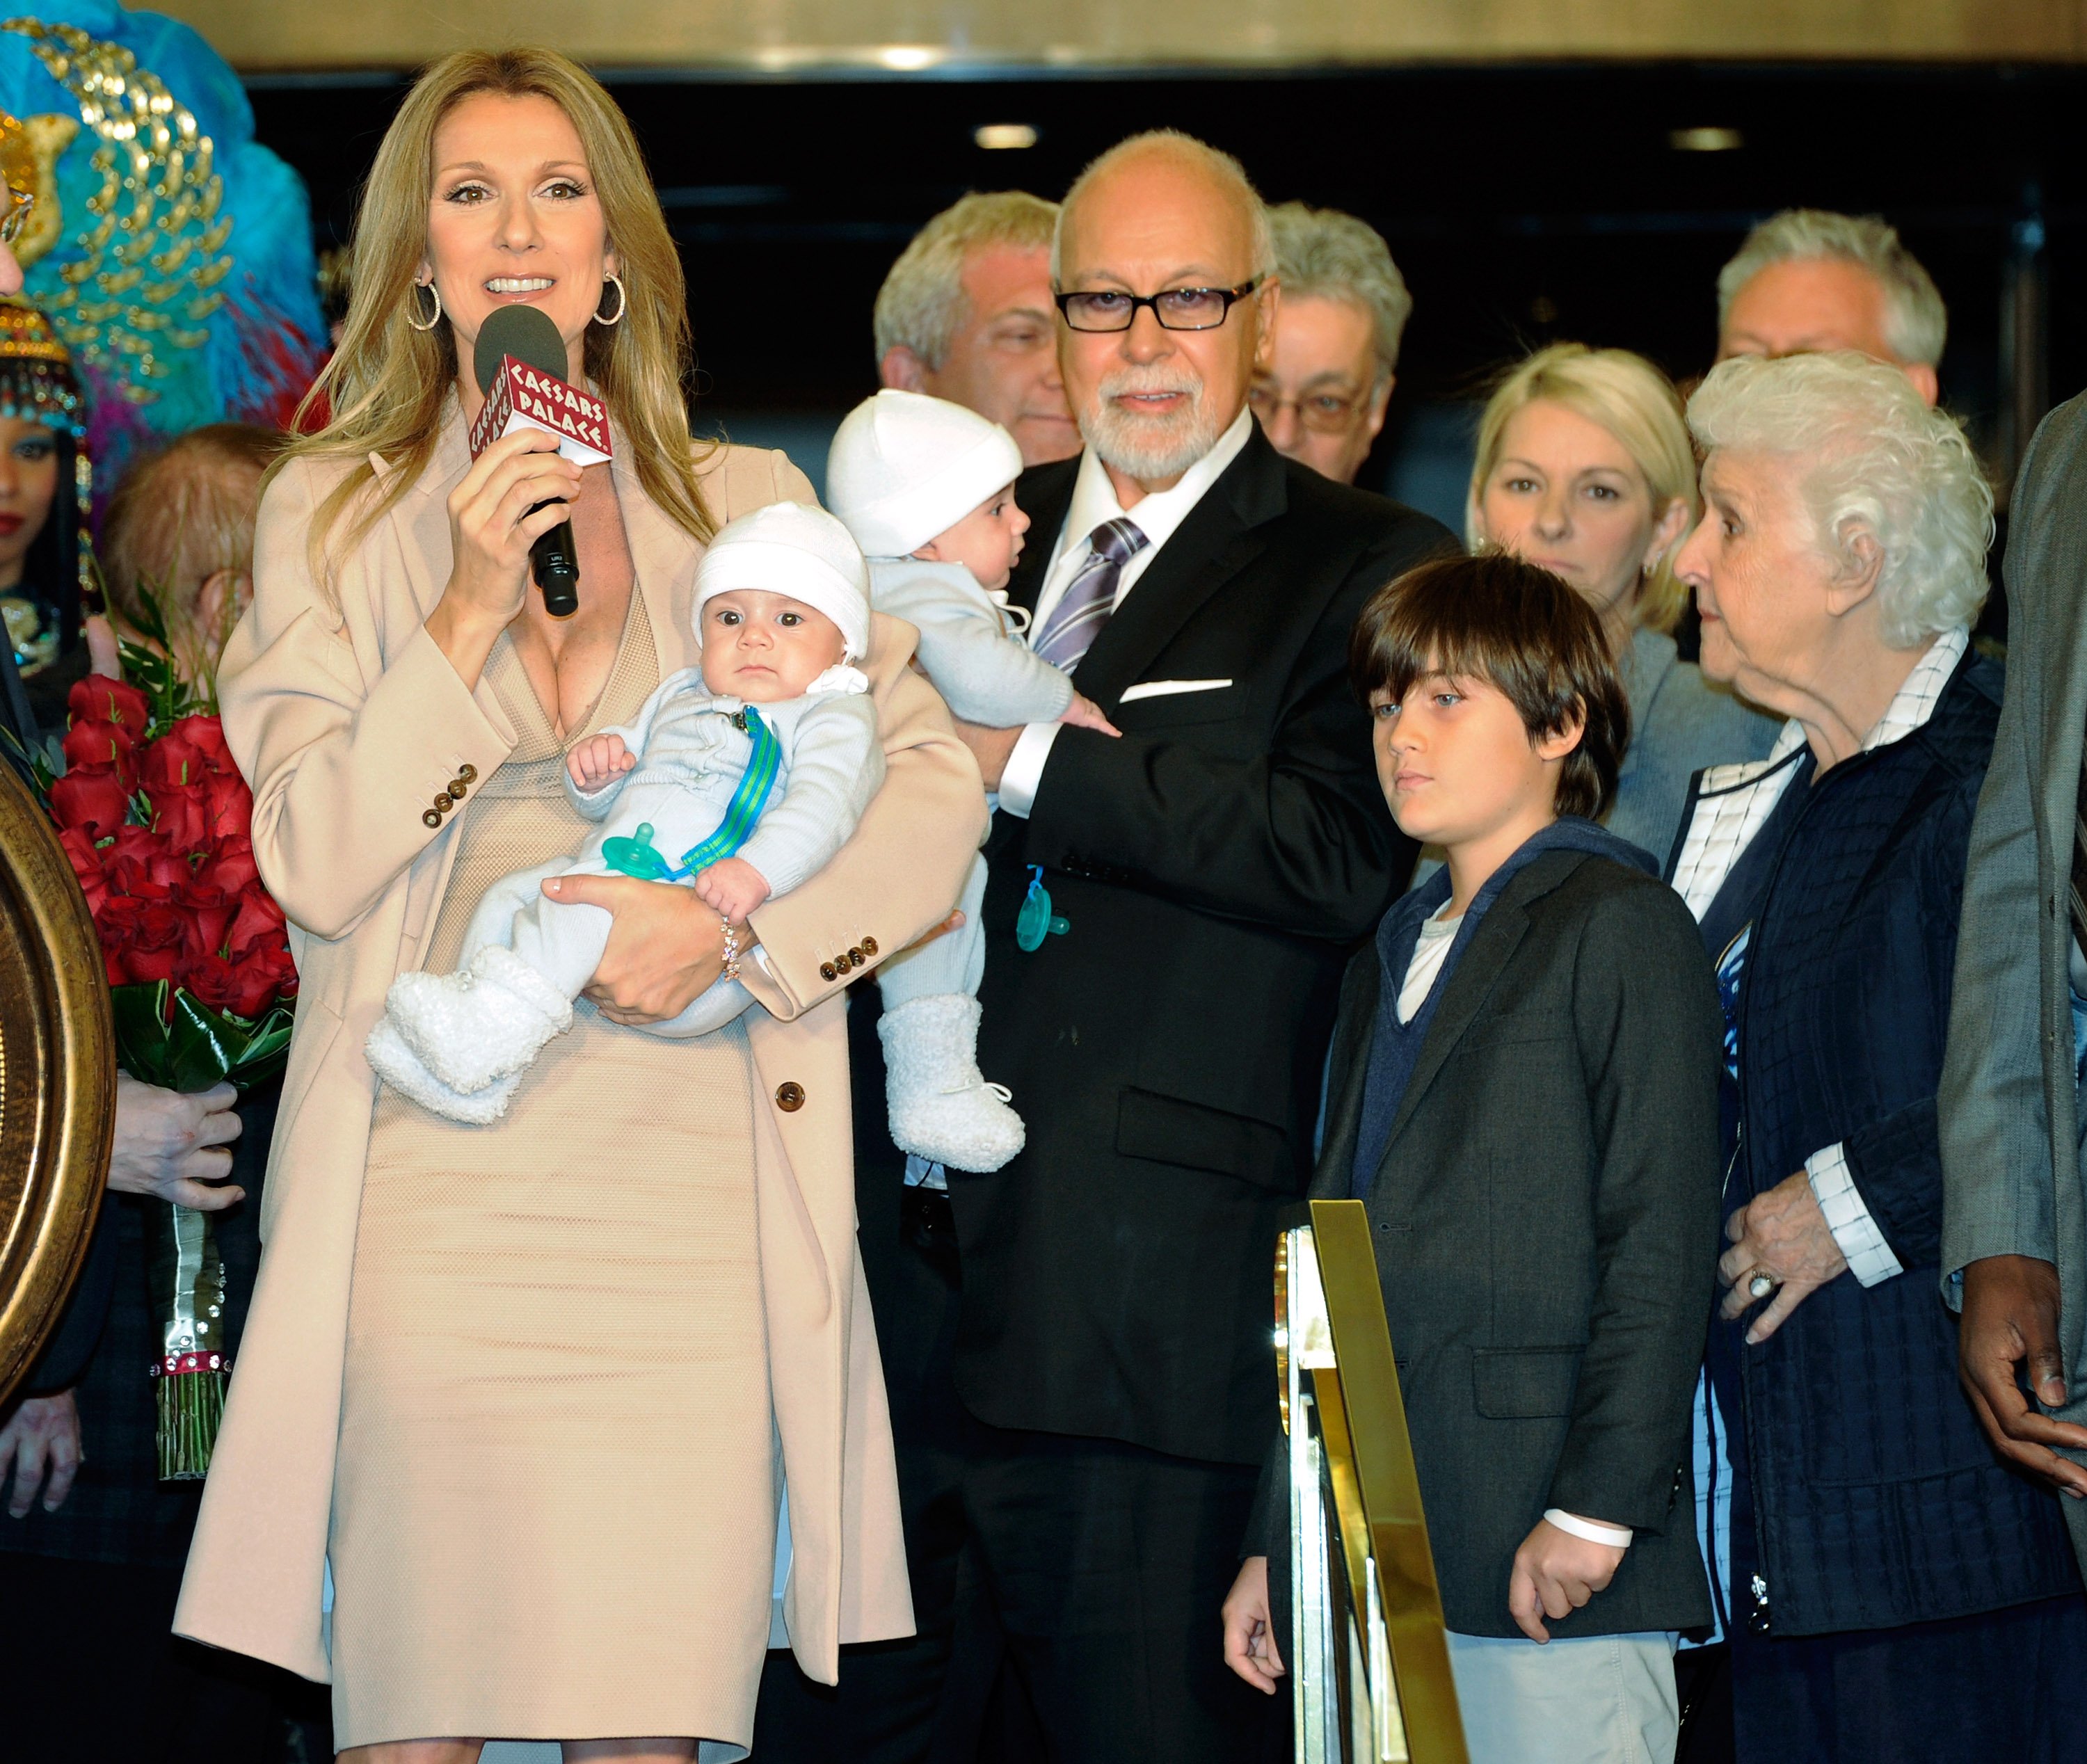  Singer Celine Dion, holding her son Nelson, her husband Rene Angelil, holding their son Eddy and their son Rene-Charles on February 16 2011 in Las Vegas | Source: Getty Images